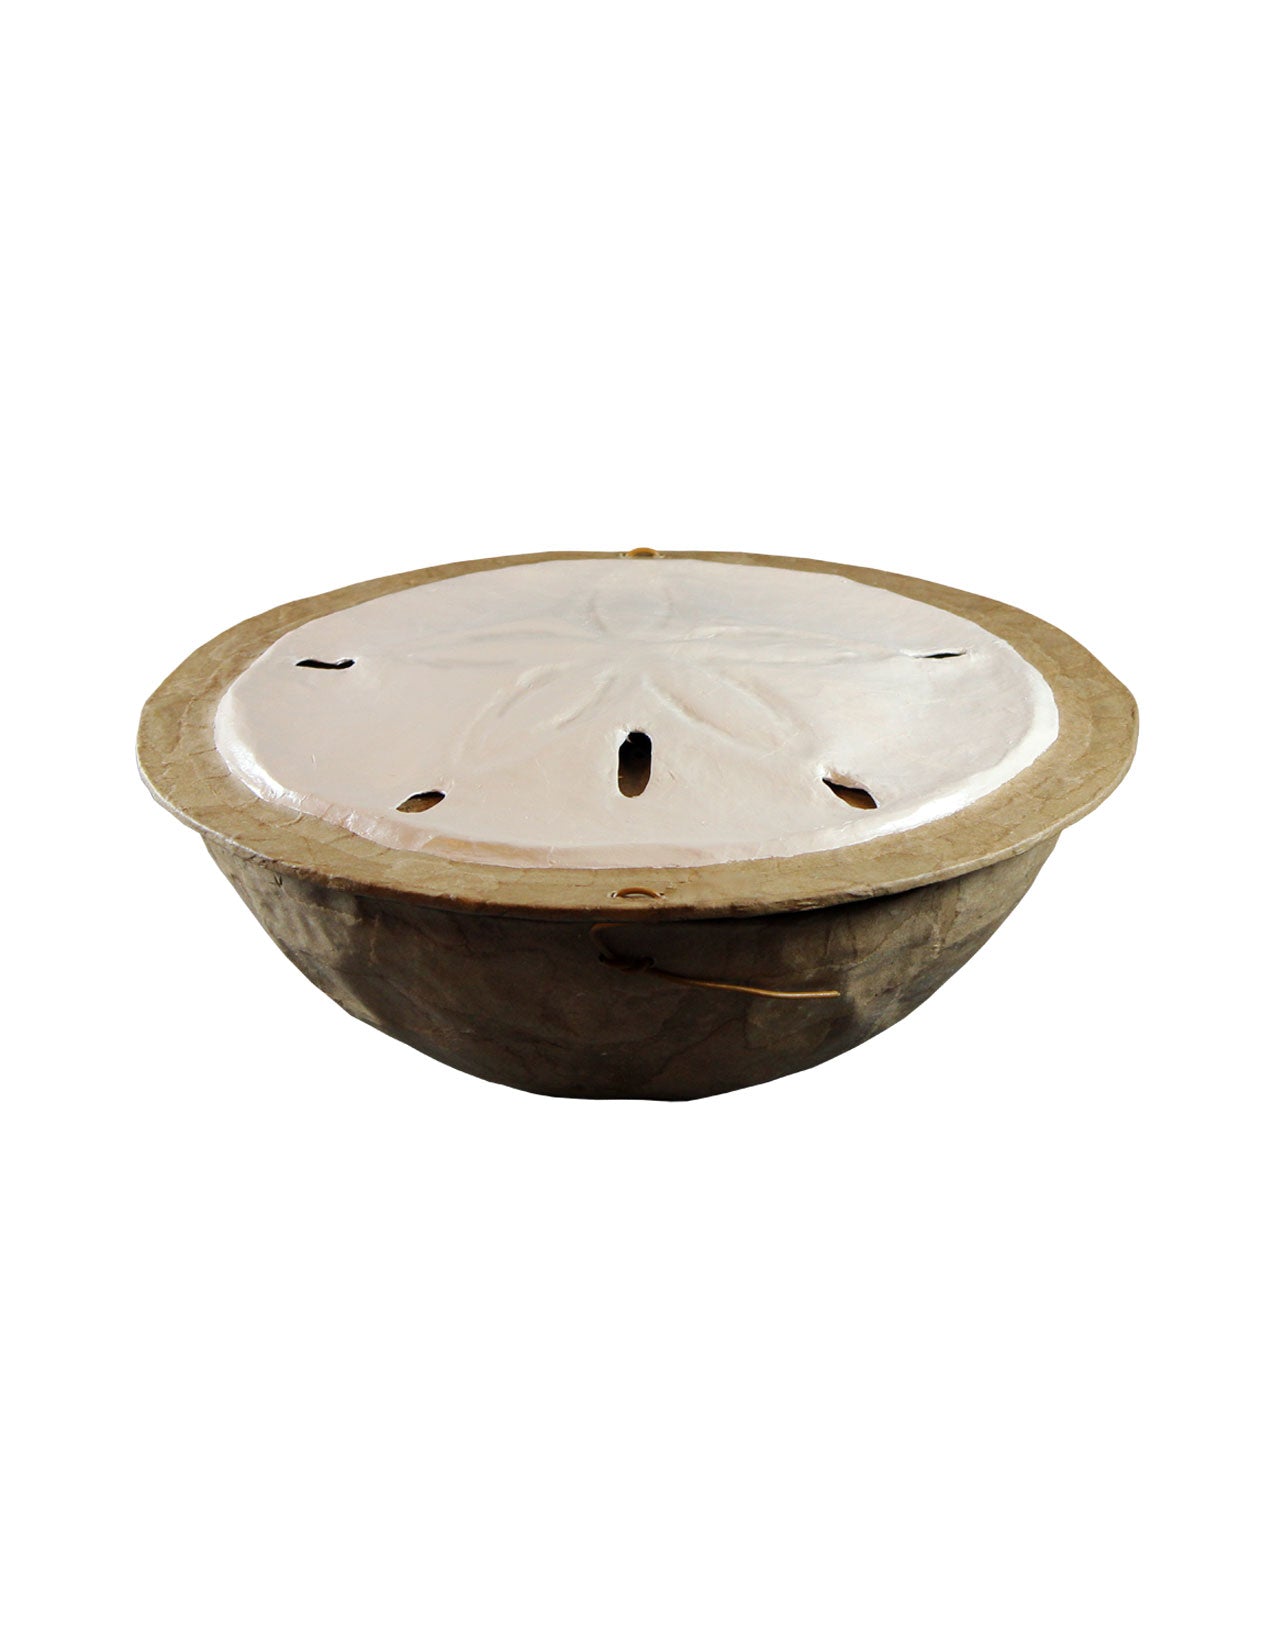 Sand Dollar - Serenity Collection Biodegradable Cremation Urn